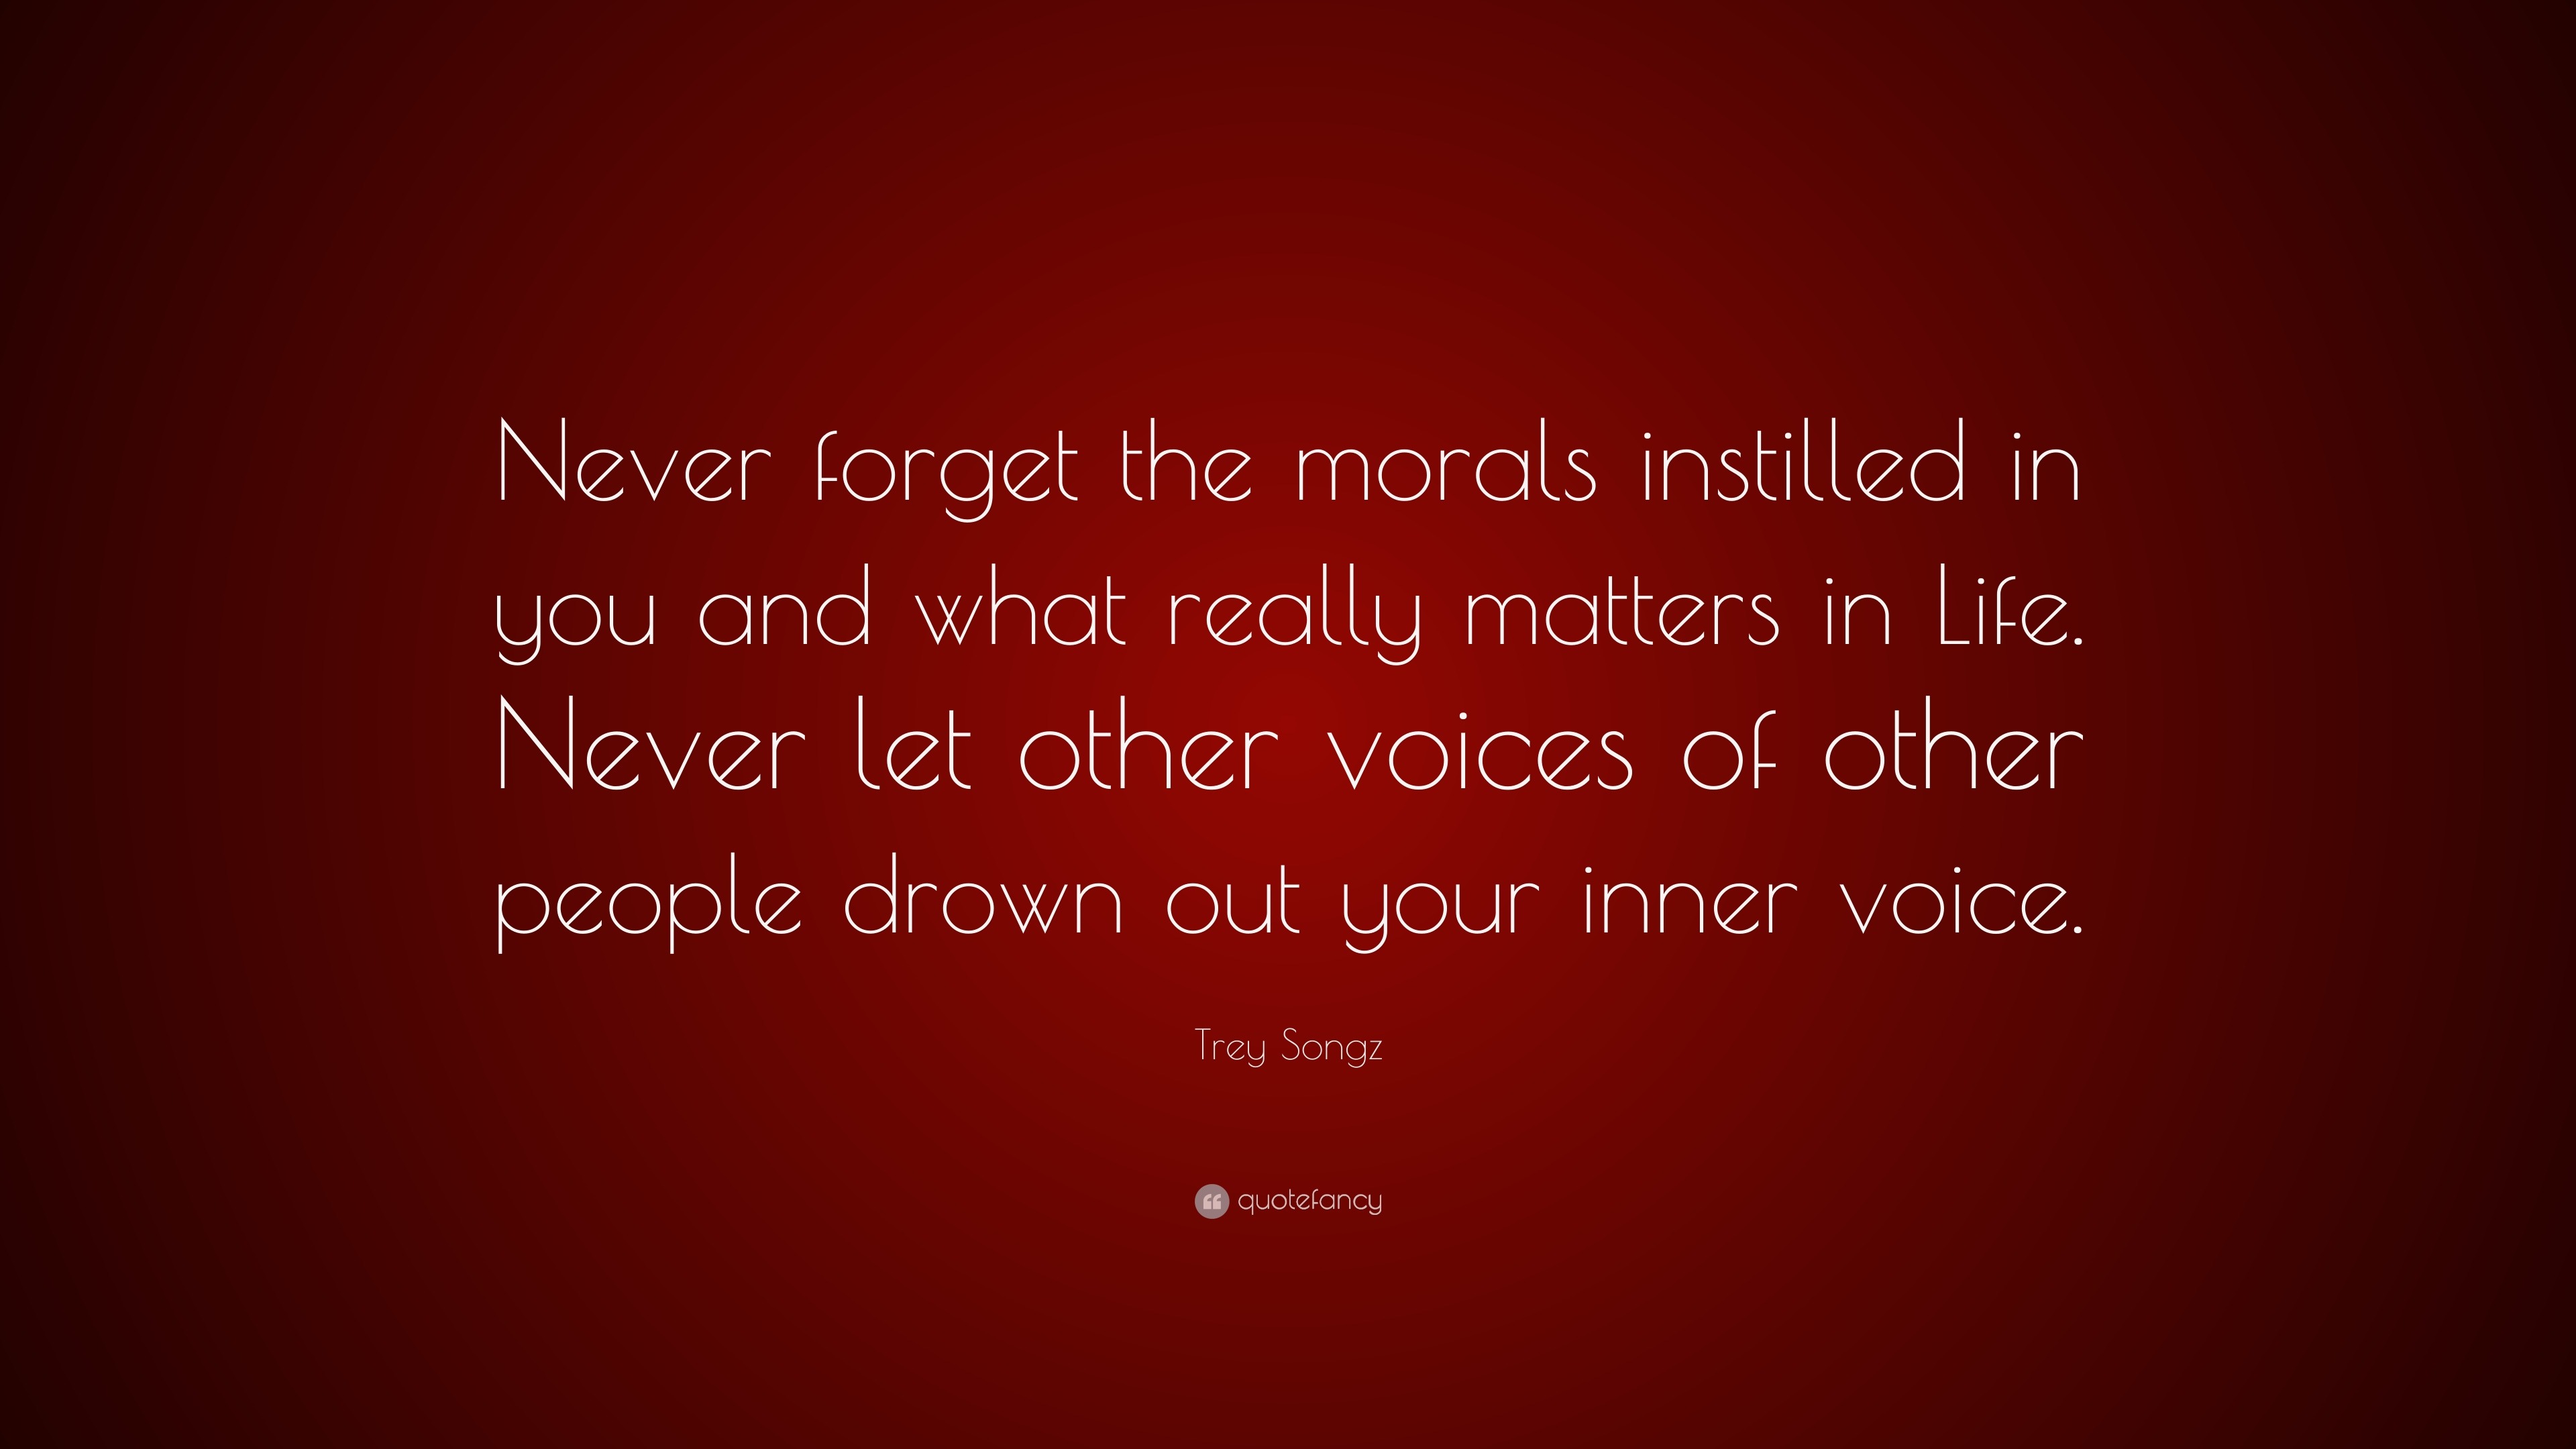 Trey Songz Quote: “Never forget the morals instilled in you and what ...